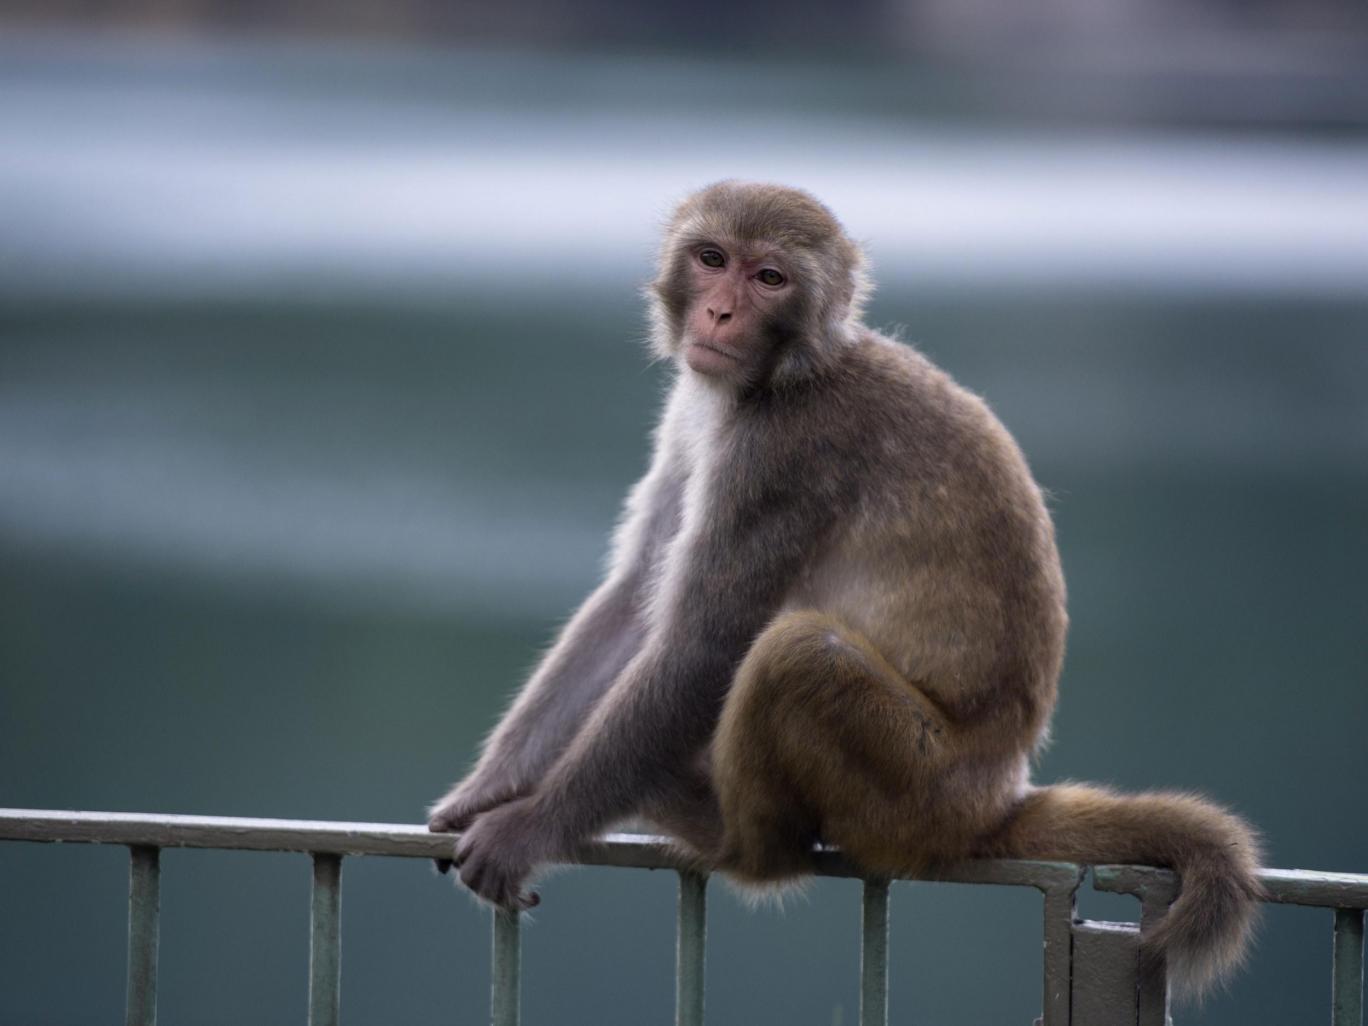 Chinese scientists create 'autistic' monkeys